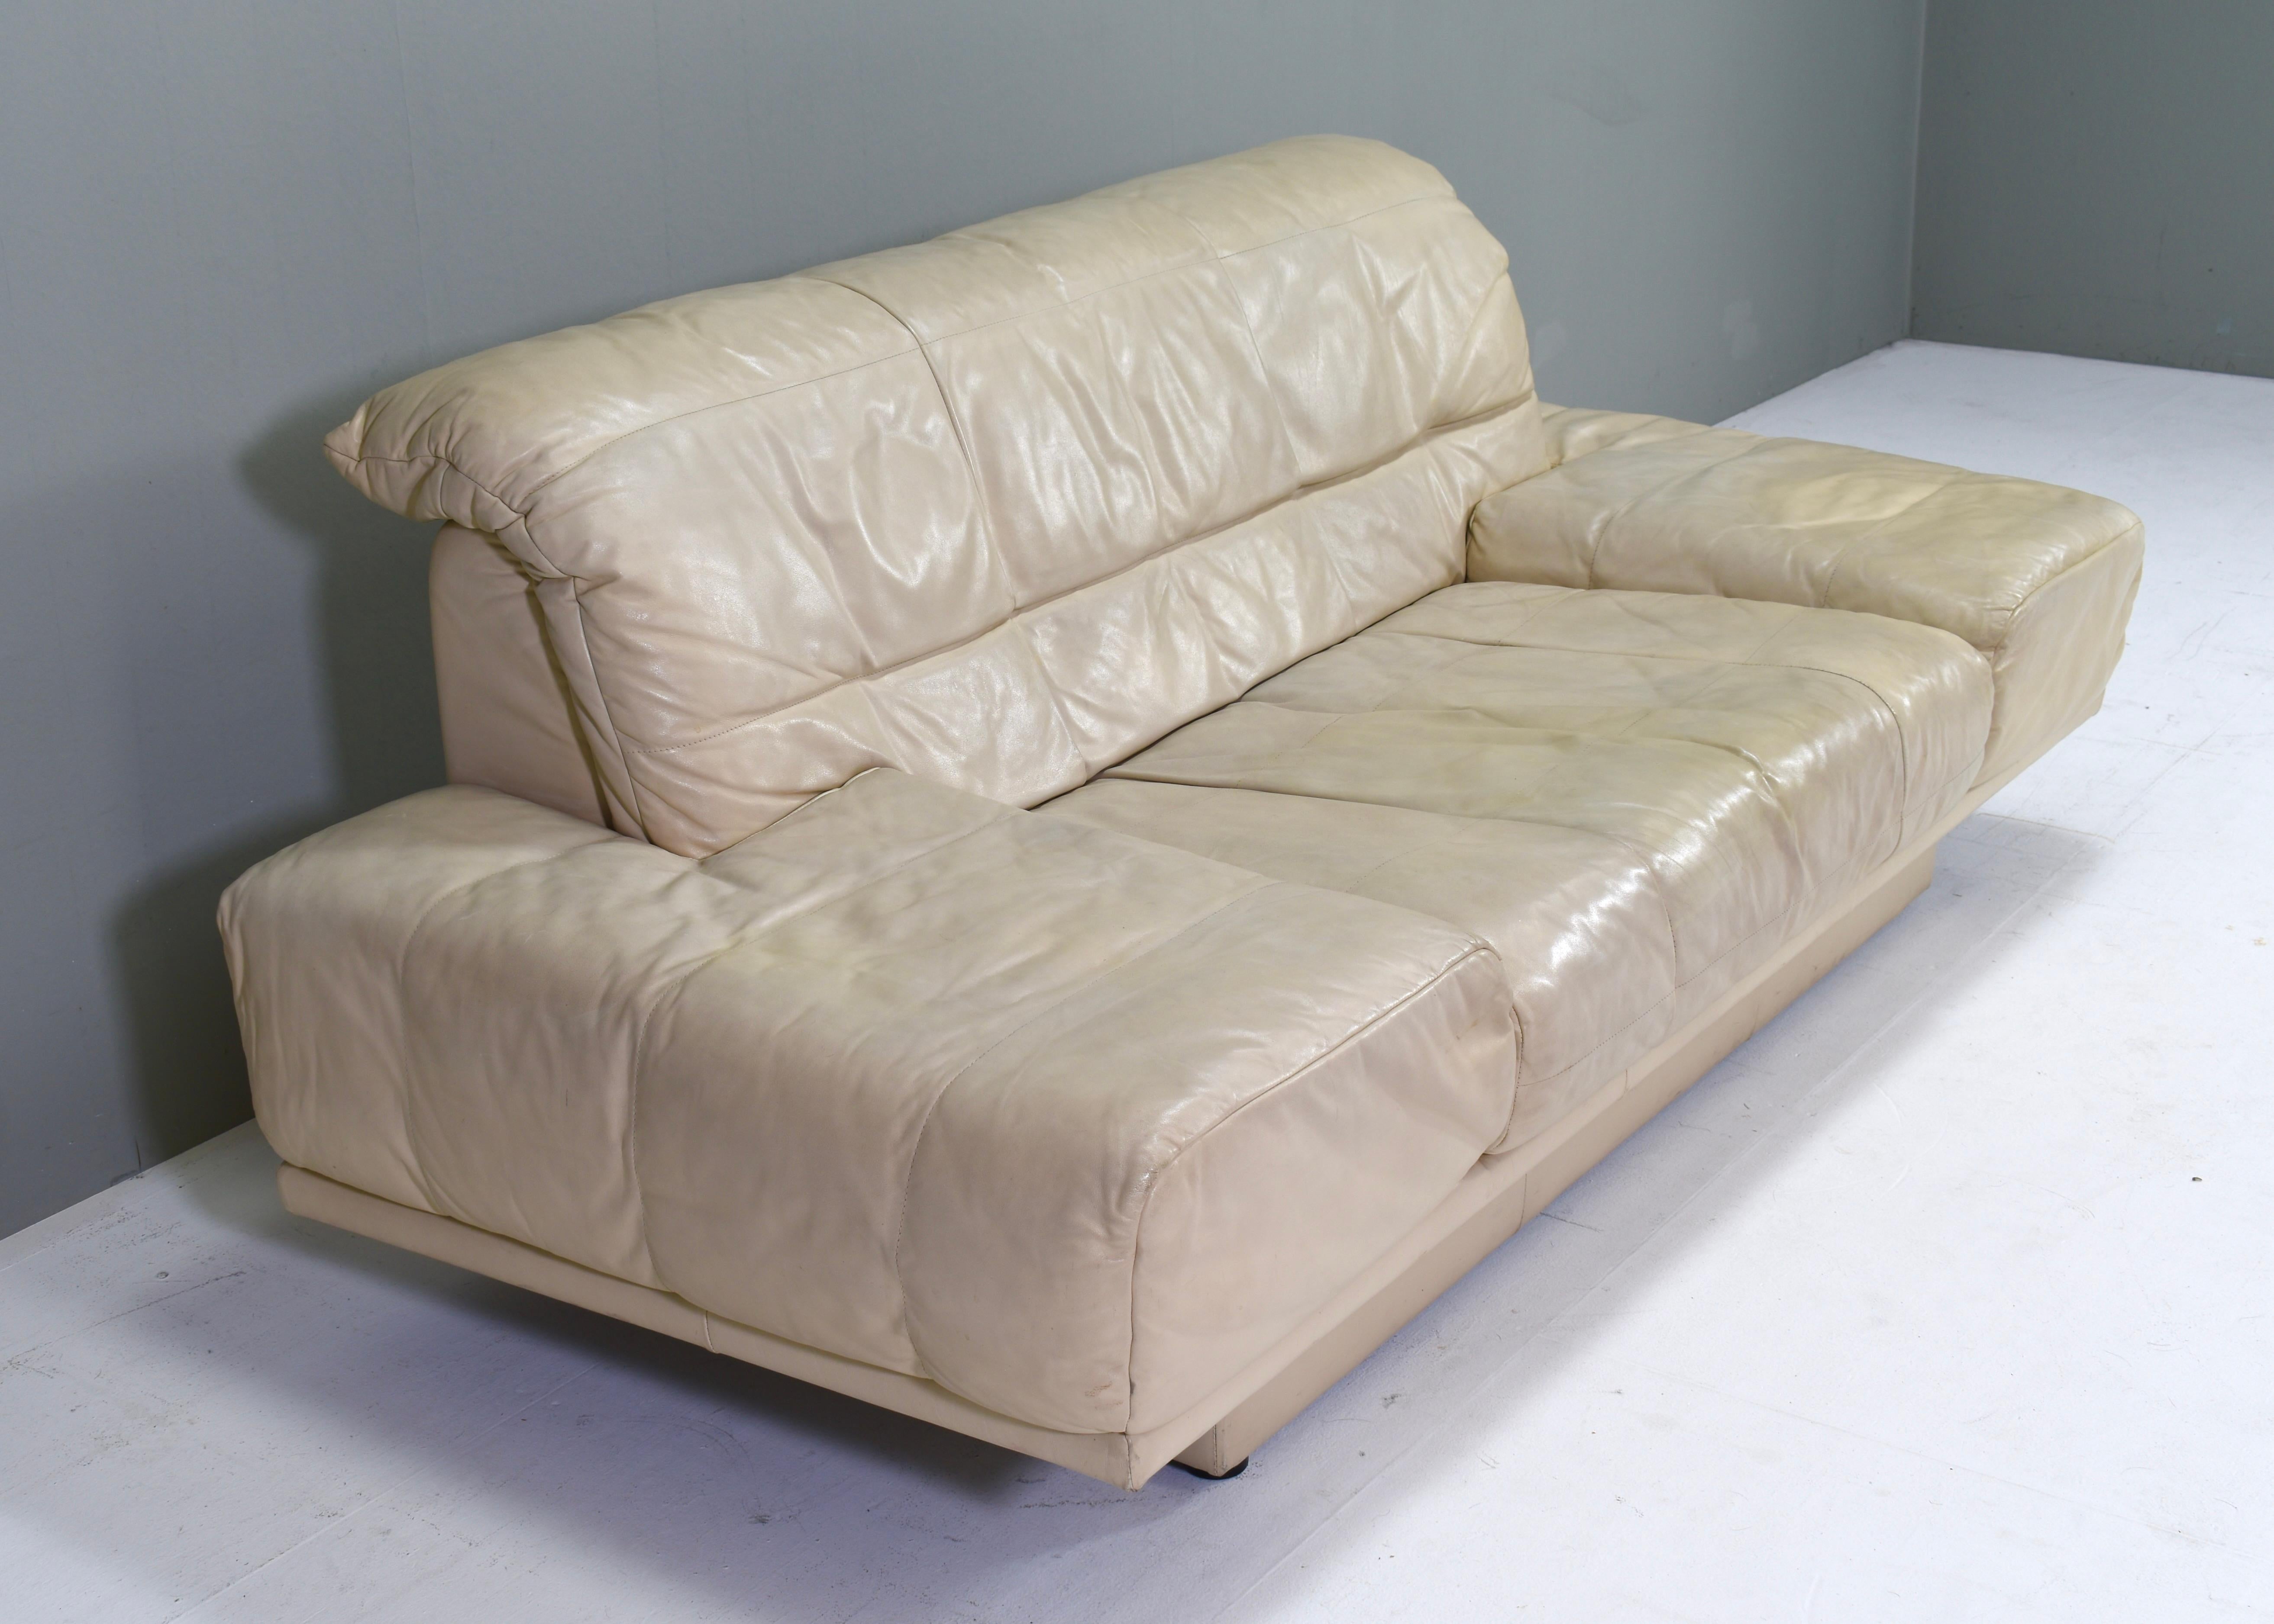 Rolf Benz 2-seat sofa in Ivory Cream White Leather – Germany, circa 1980-1990 For Sale 4